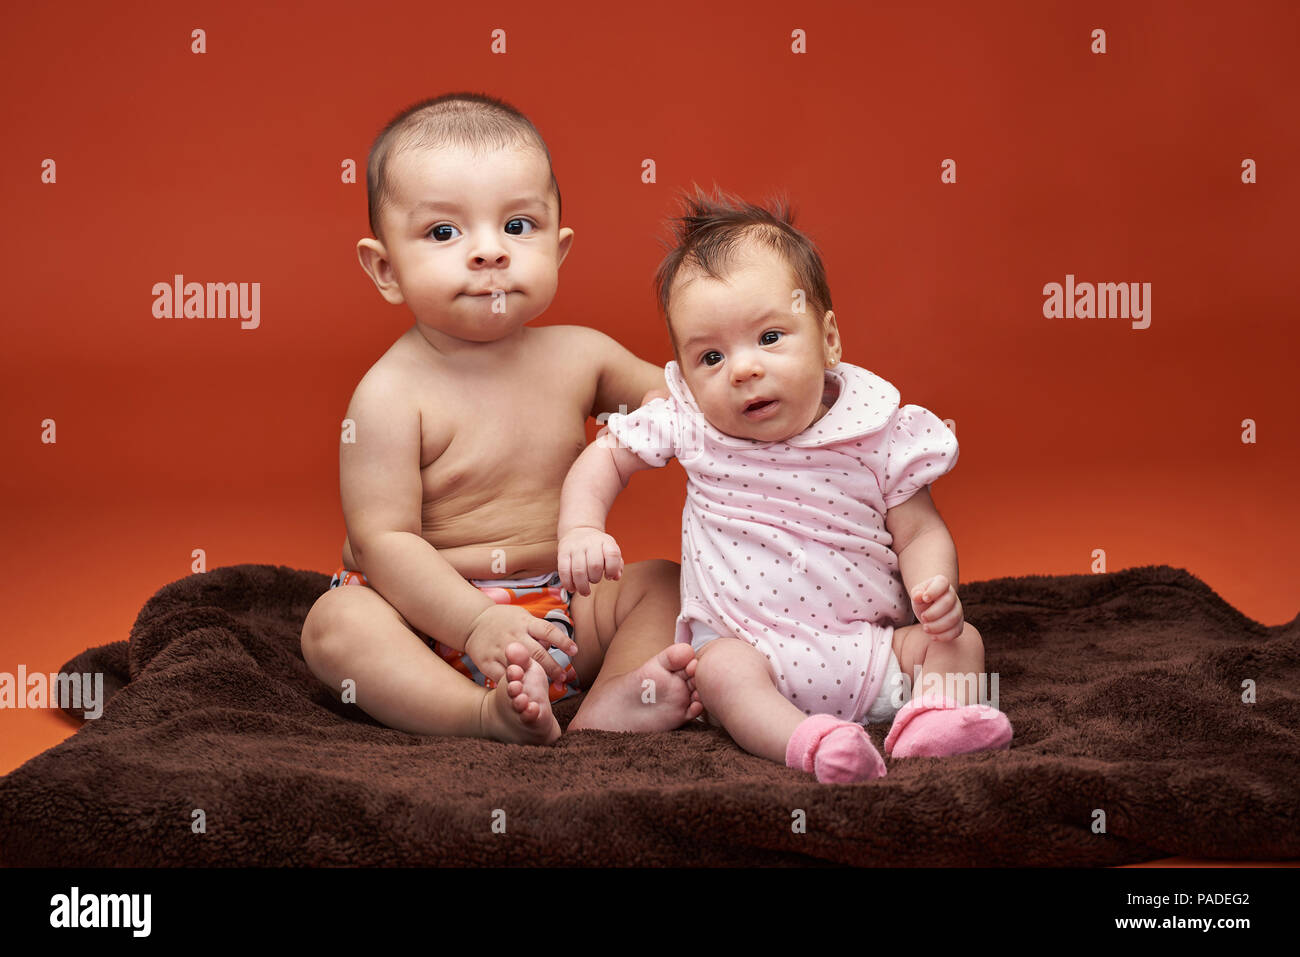 Two small baby kids portrait sitting on blanket isolated on orange color background Stock Photo